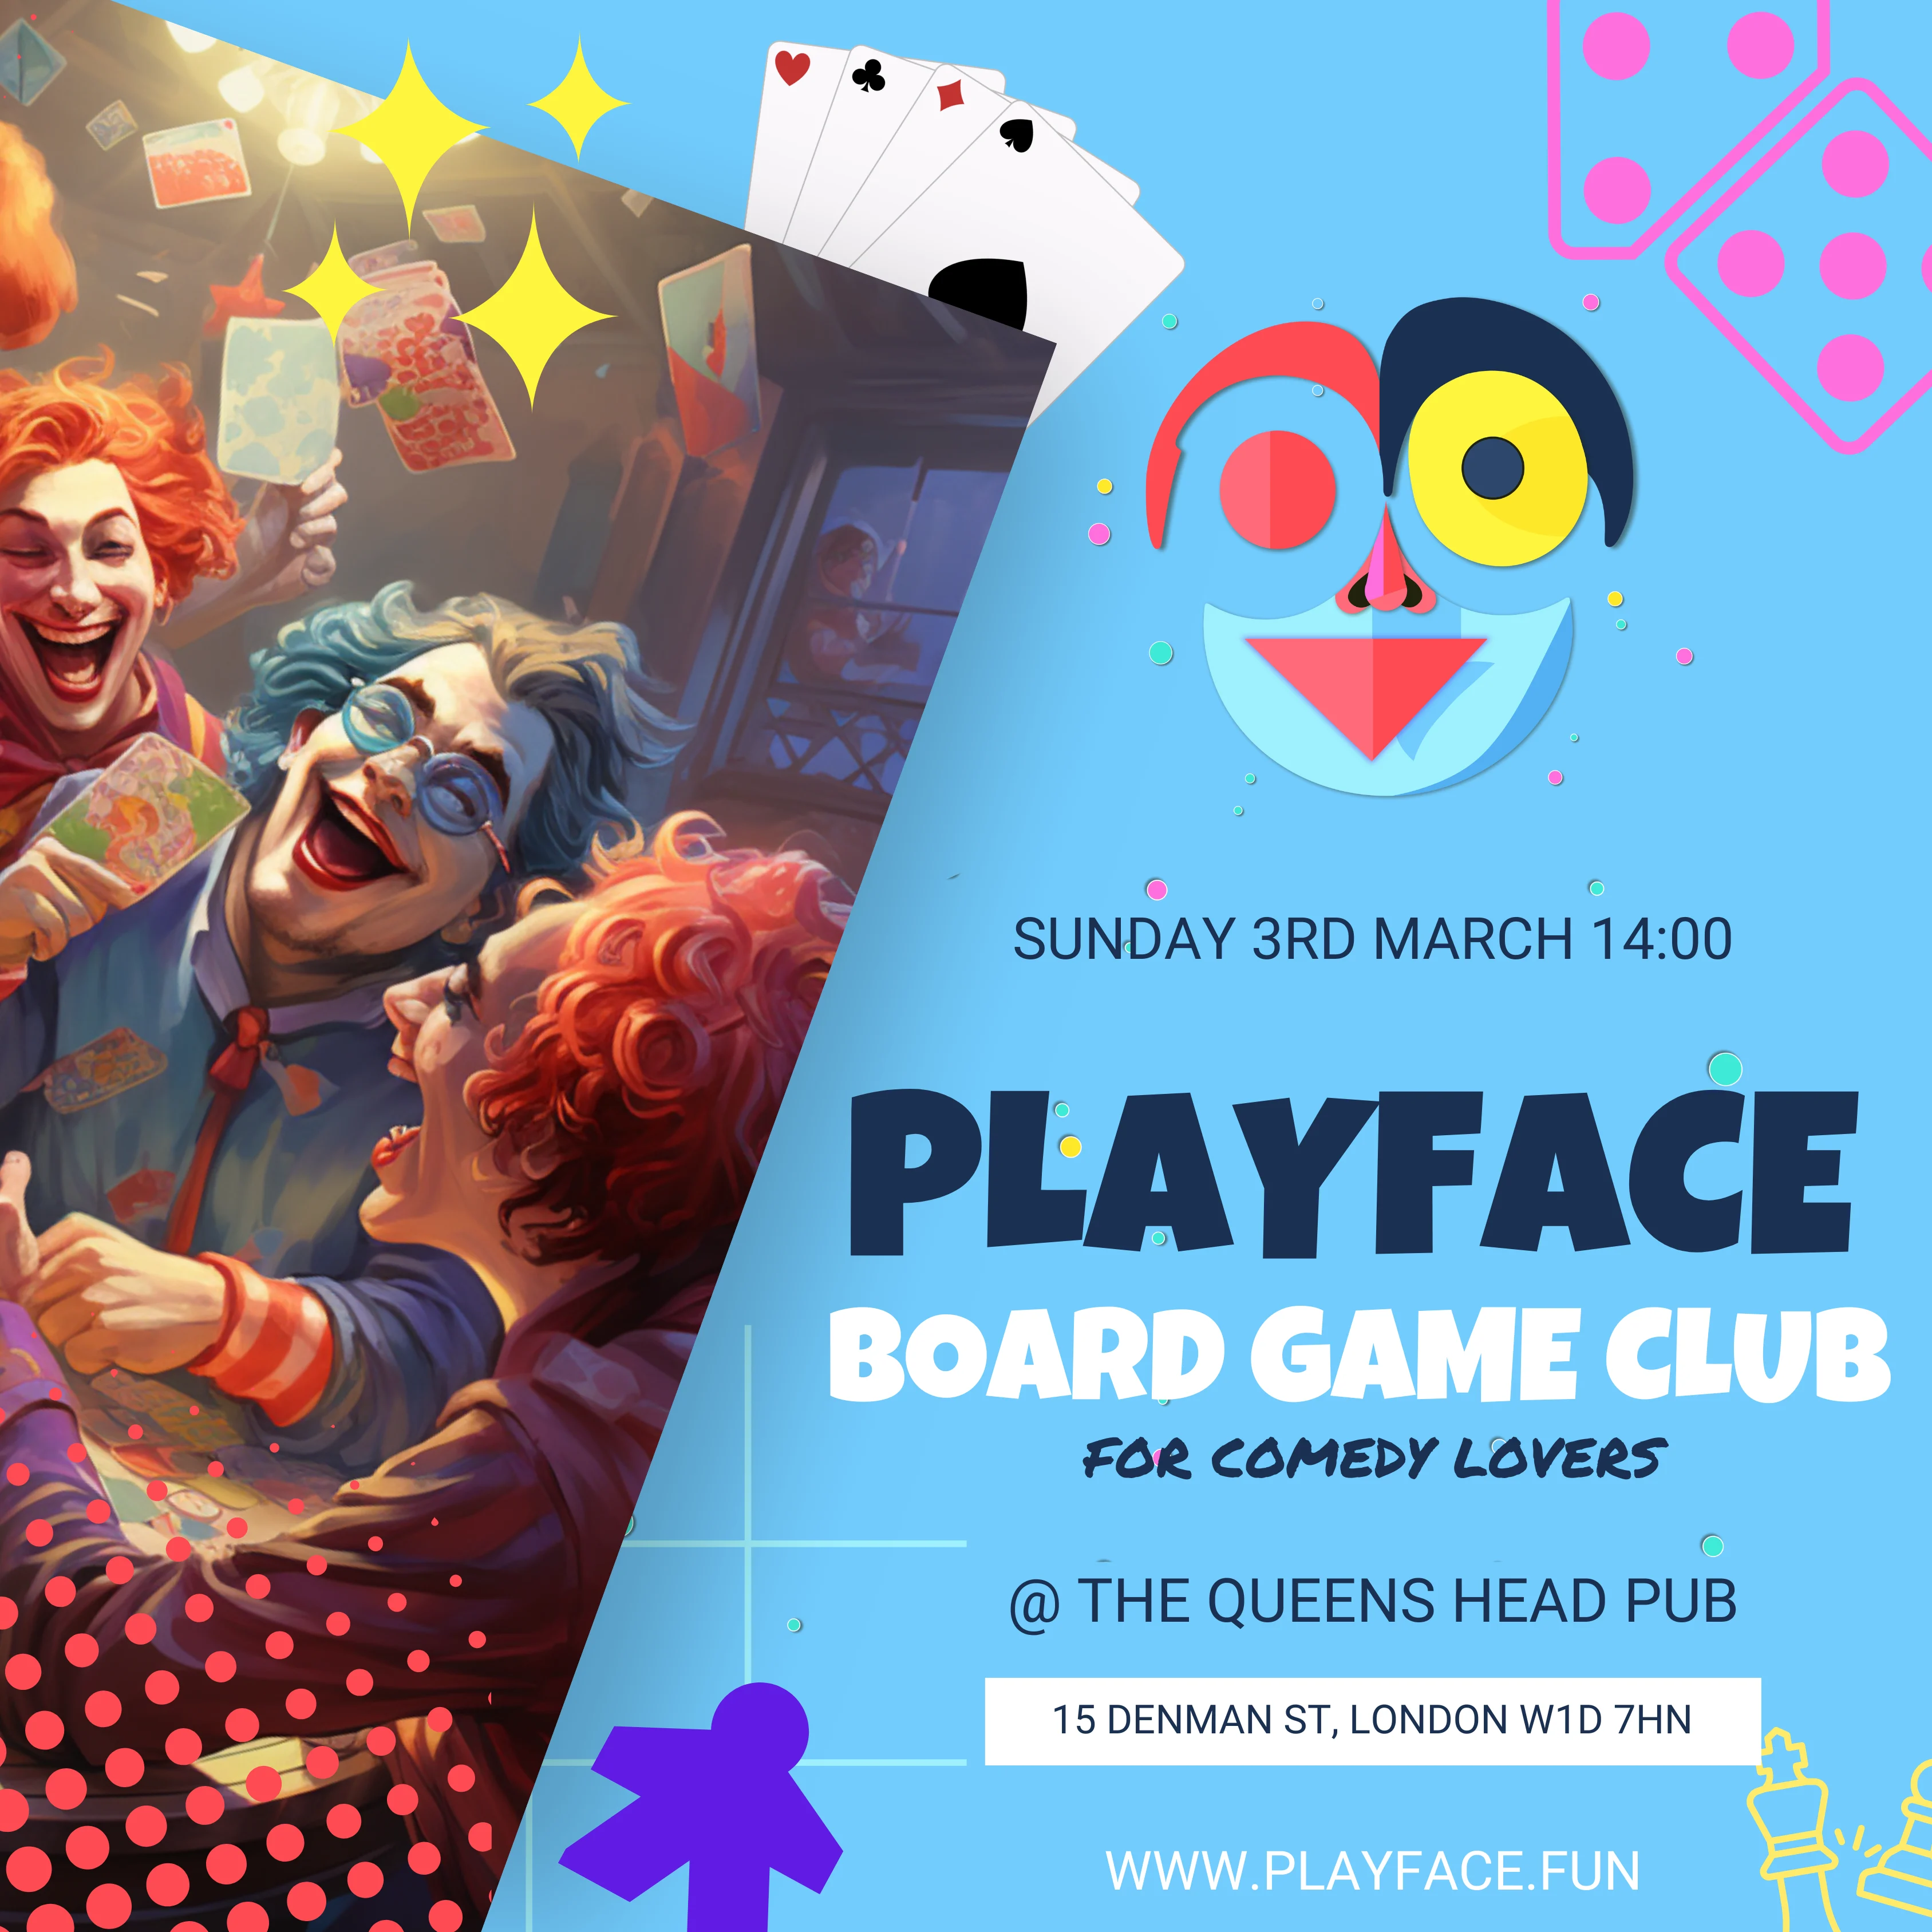 Poster for the Playface Board Game Club for comedians